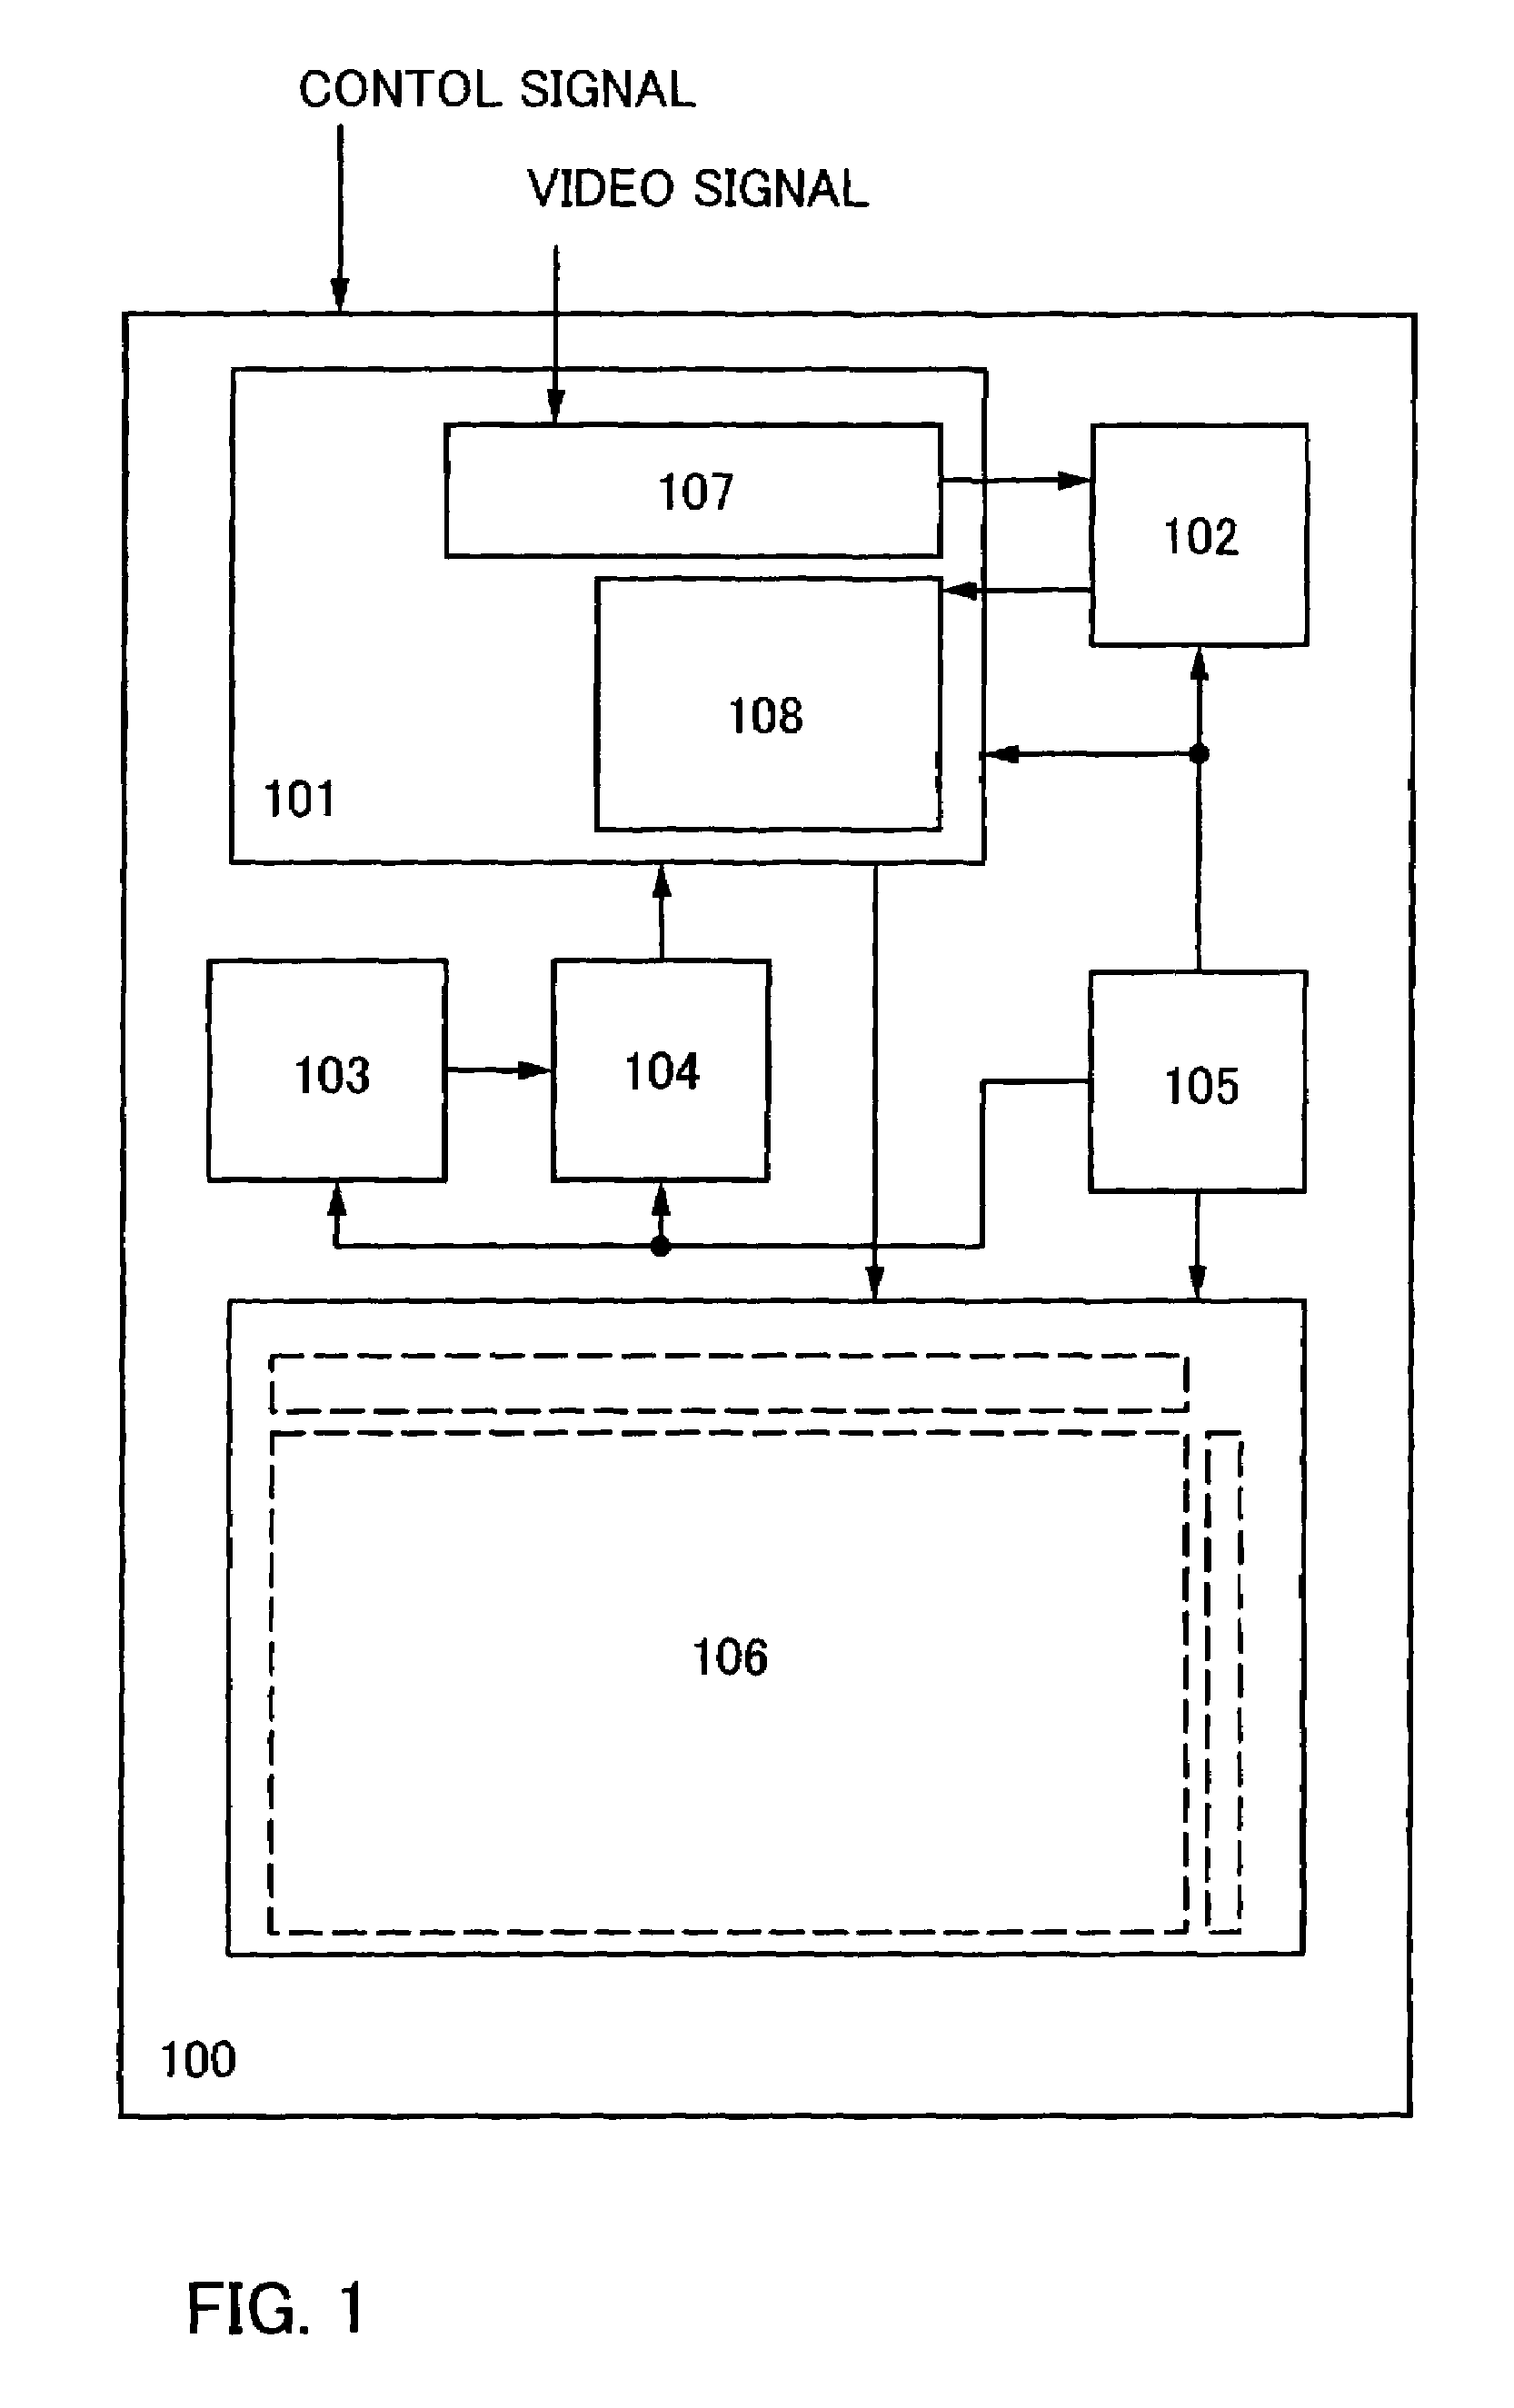 Display device with ambient light sensing